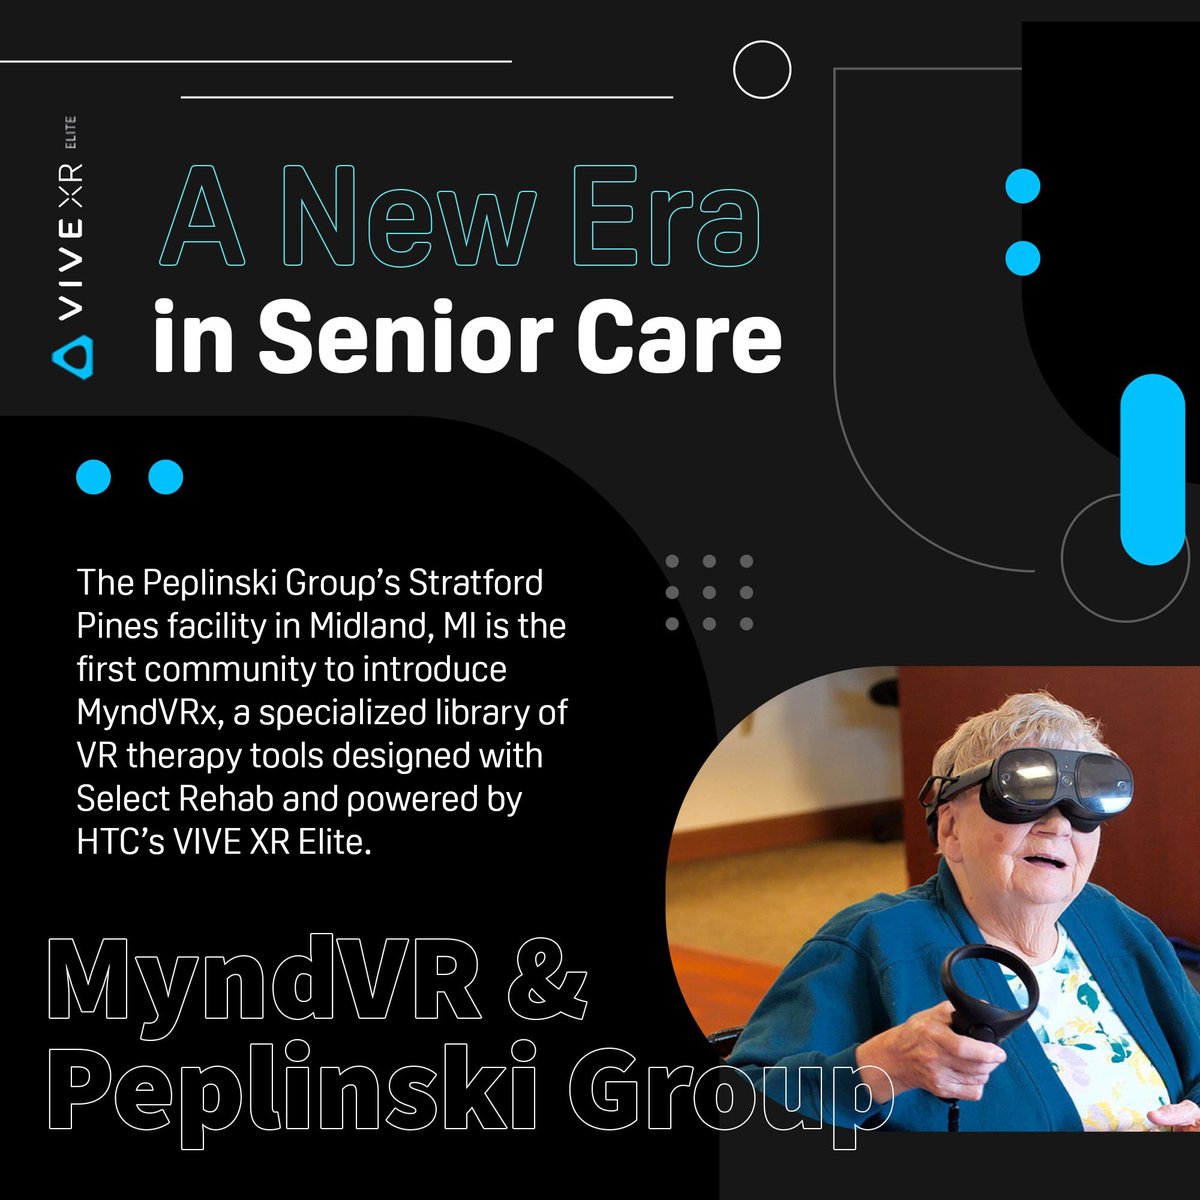 MyndVR and The Peplinski Group partner to bring VR-based digital therapeutics to Michigan senior communities. Learn more about VR’s positive impact on healthcare: htcvive.co/VBMYPGX #MyndImmersive #PeplinskiGroup #SeniorCare #Therapy #Healthcare